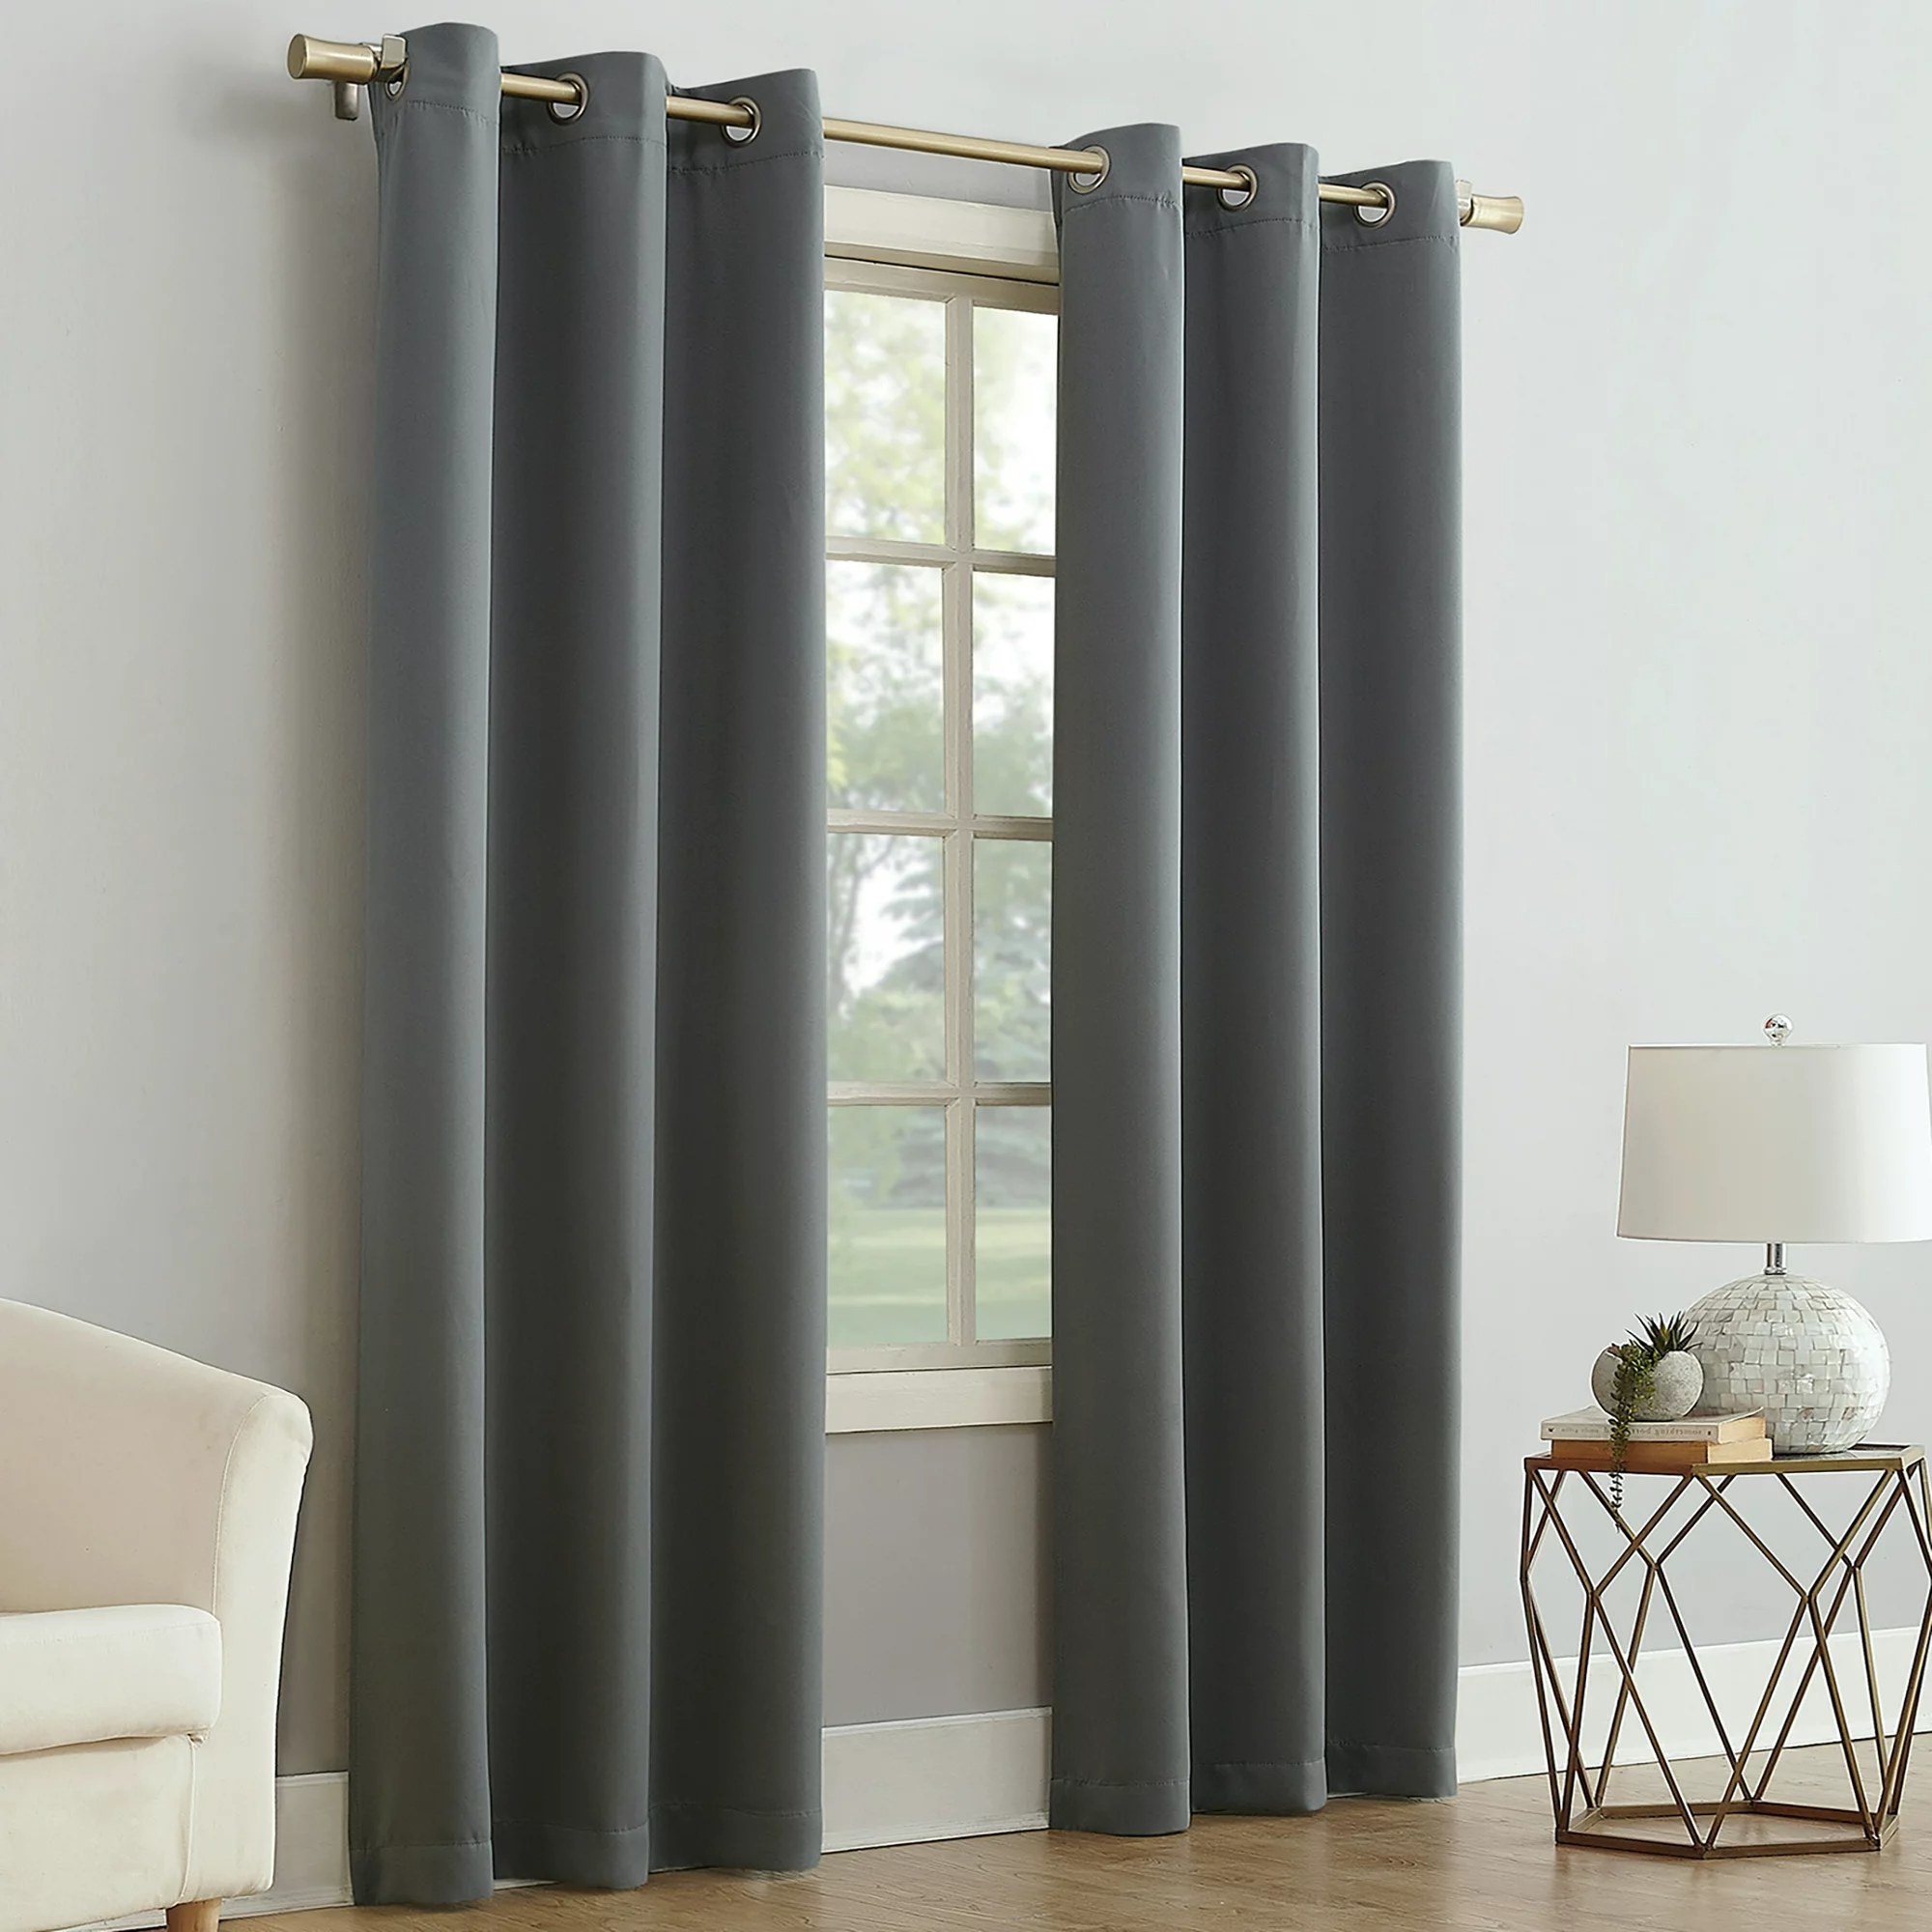 the curtain panels in the color Gray